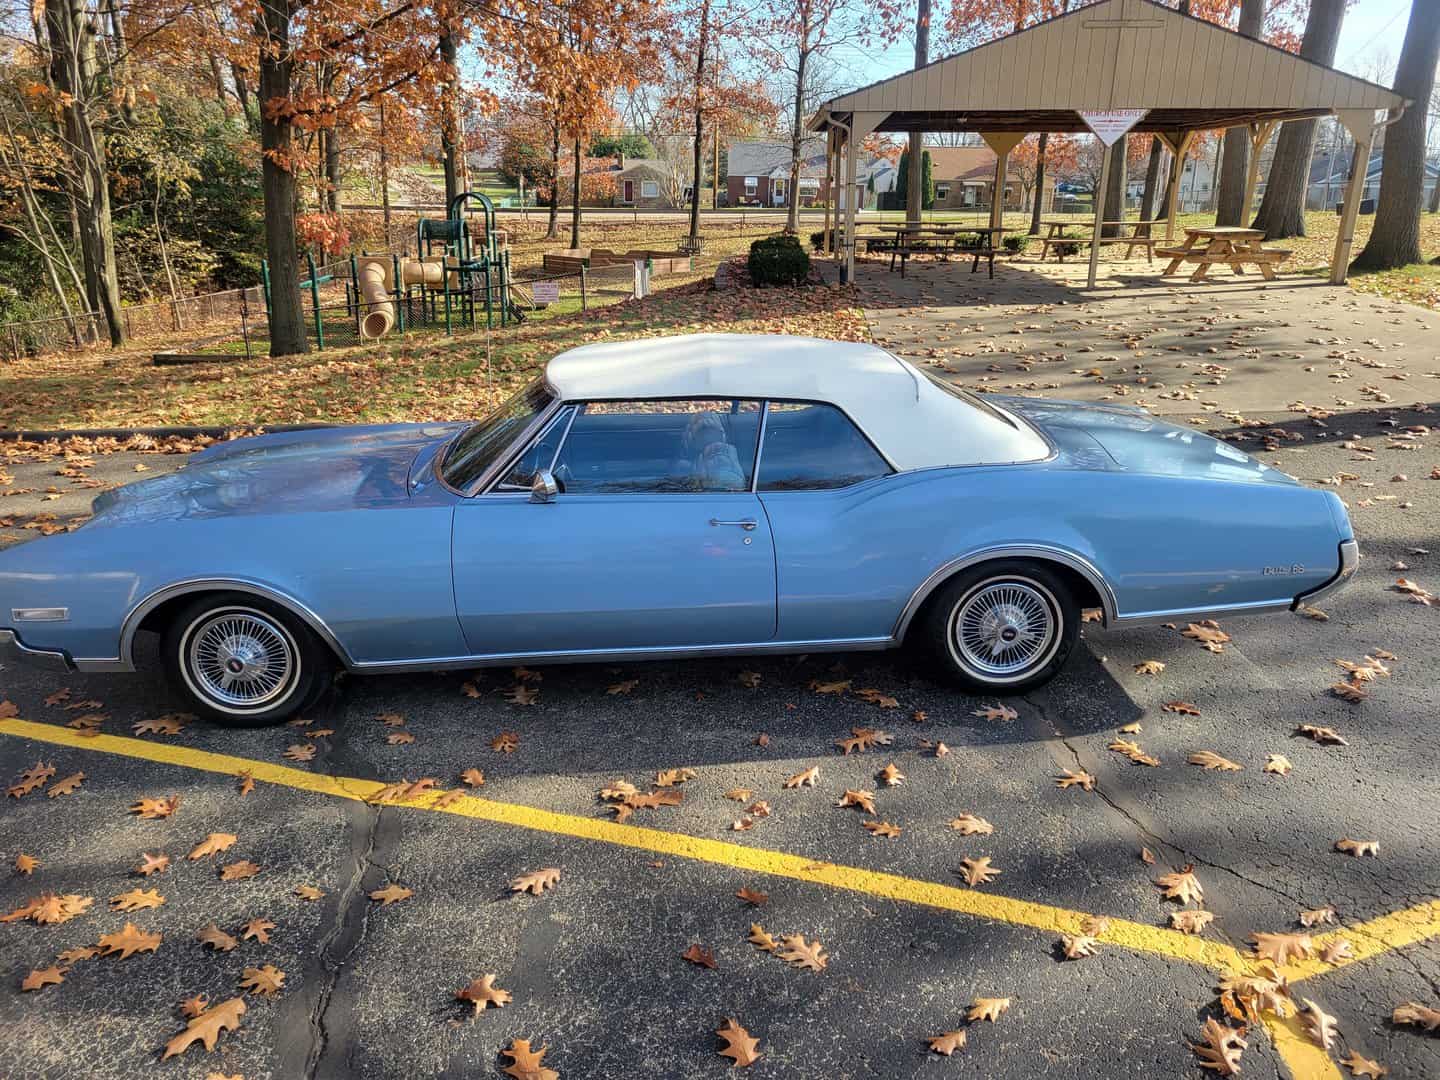 A 1967 Oldsmobile Delta 88 Convertible Parked In A Parking Lot.